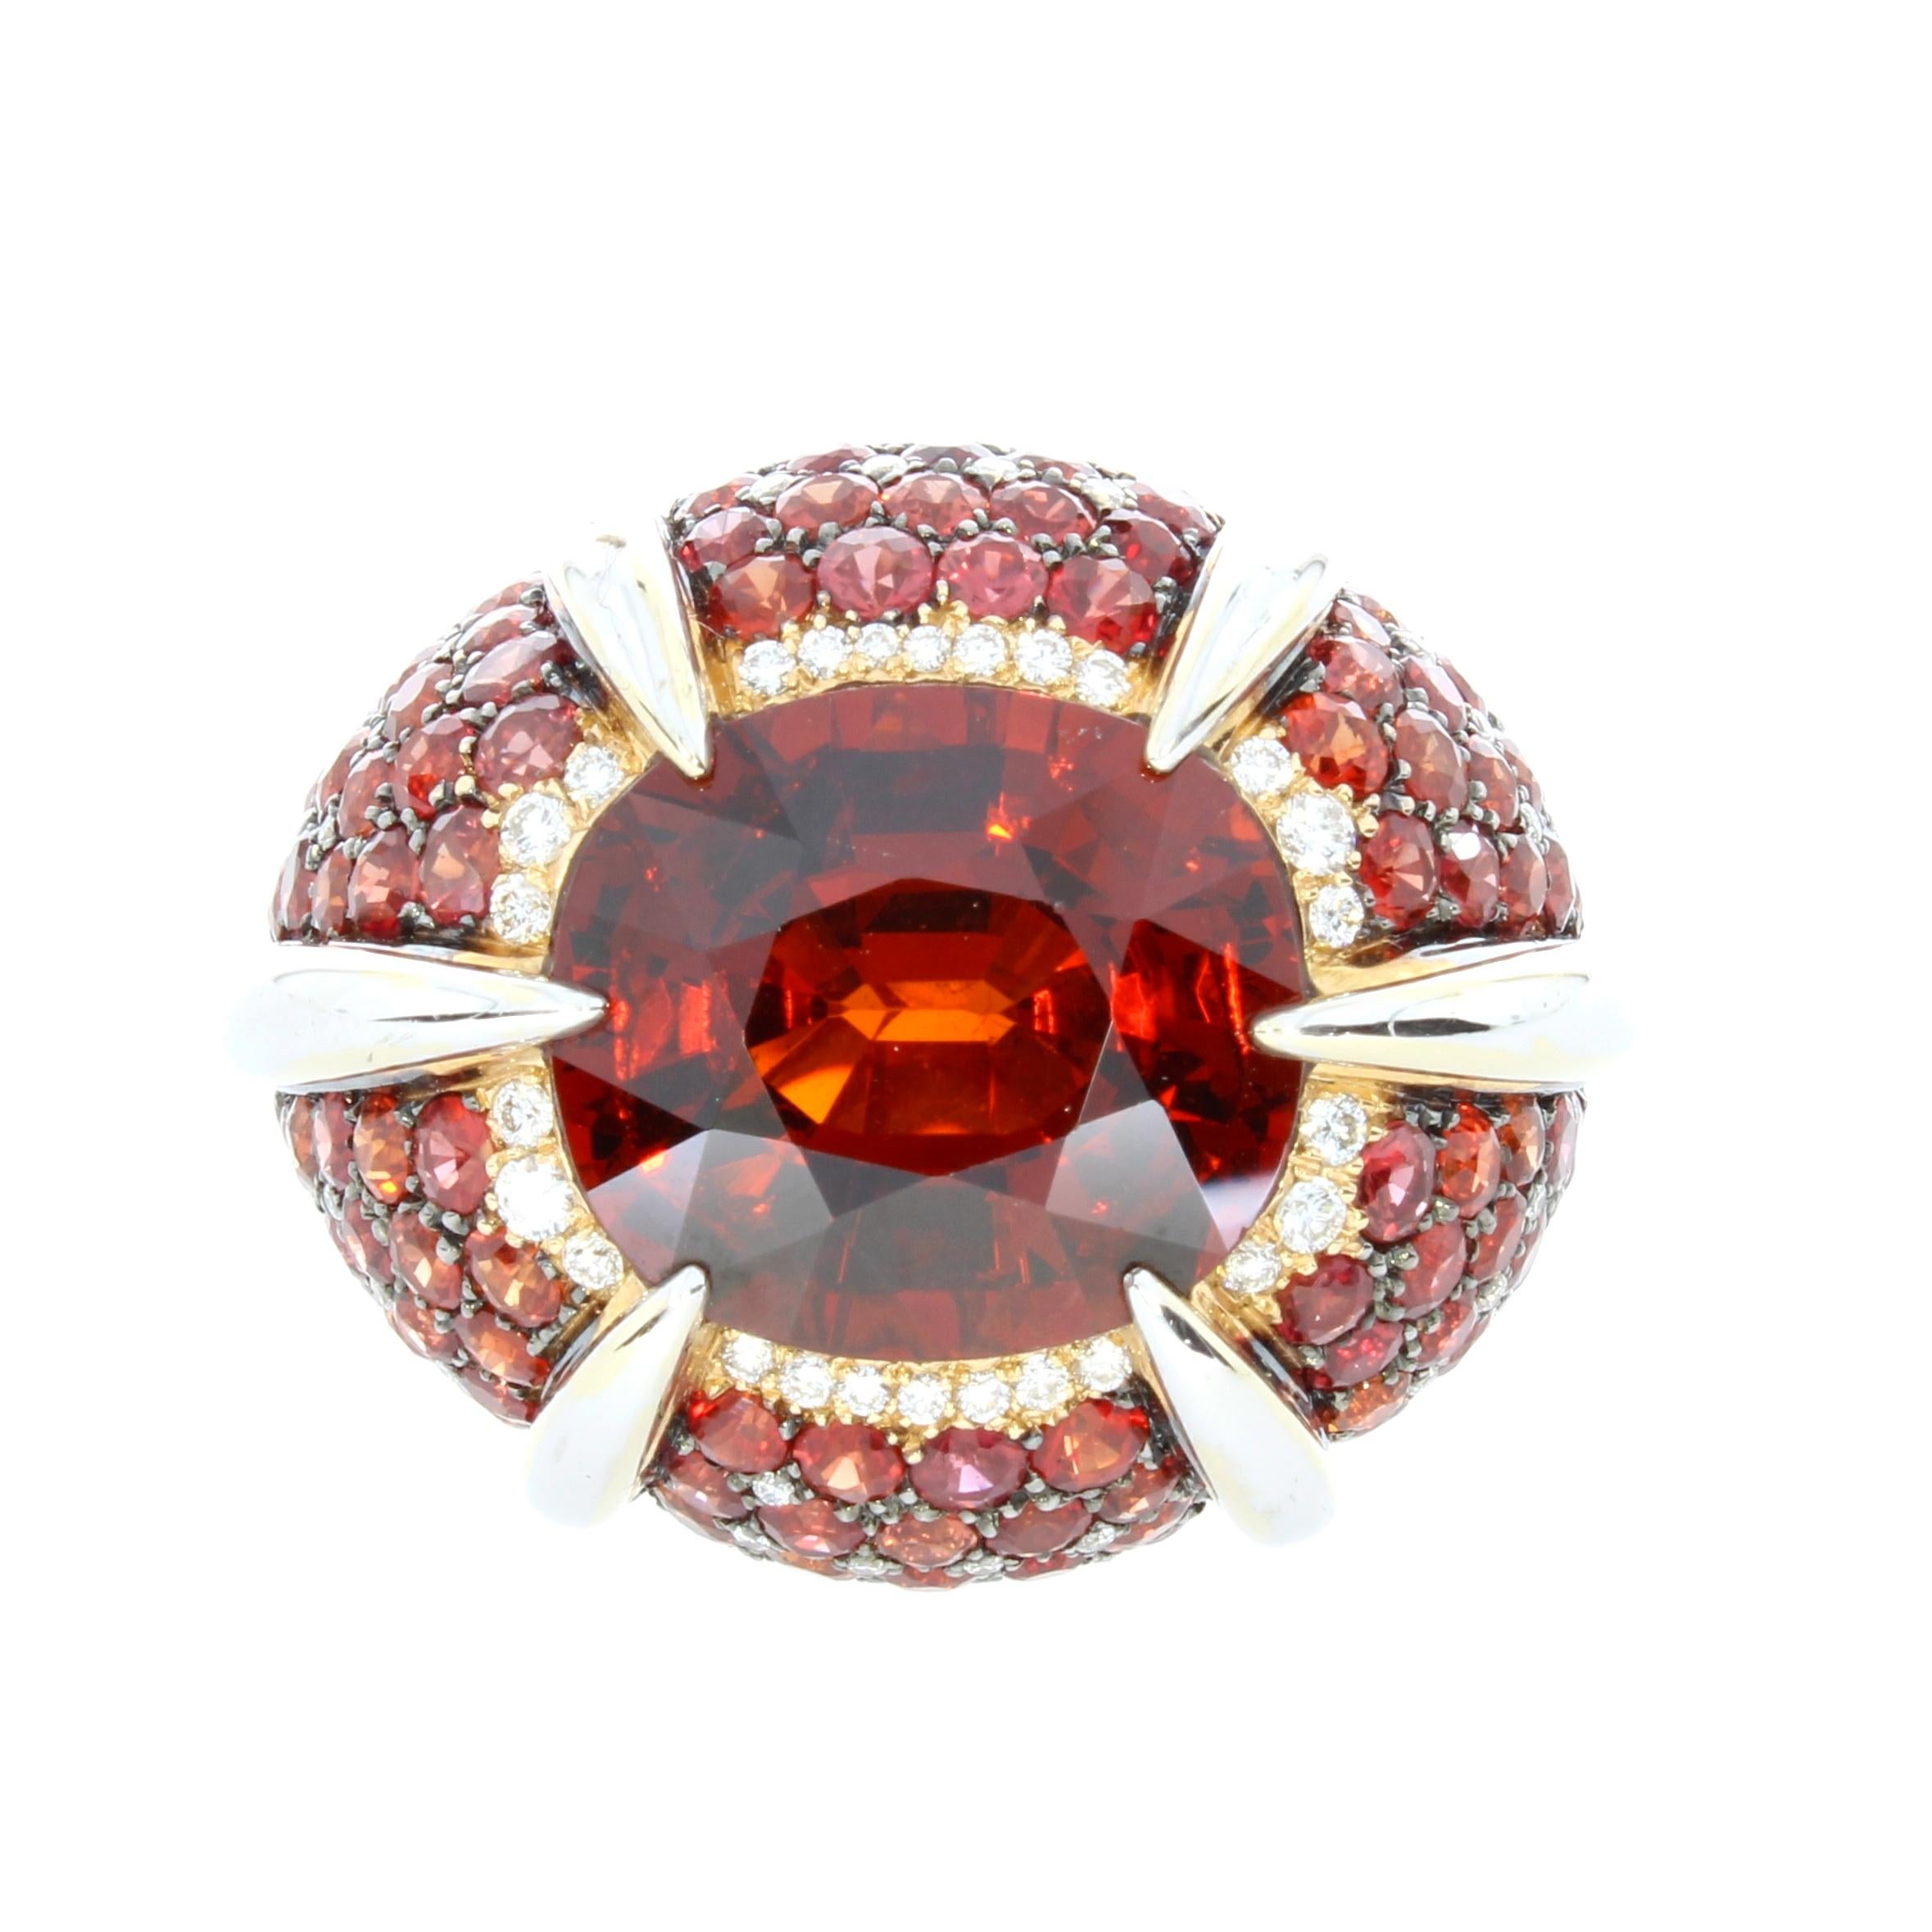 A deeply hued orange garnet sits boldly upon a scintillating pave of orange sapphires, surrounded by brilliant cut diamonds and embraced in this opulent design.

Orange Garnet Sapphire and Diamond Signature cocktail Ring
18 karat Rose Gold
15.82